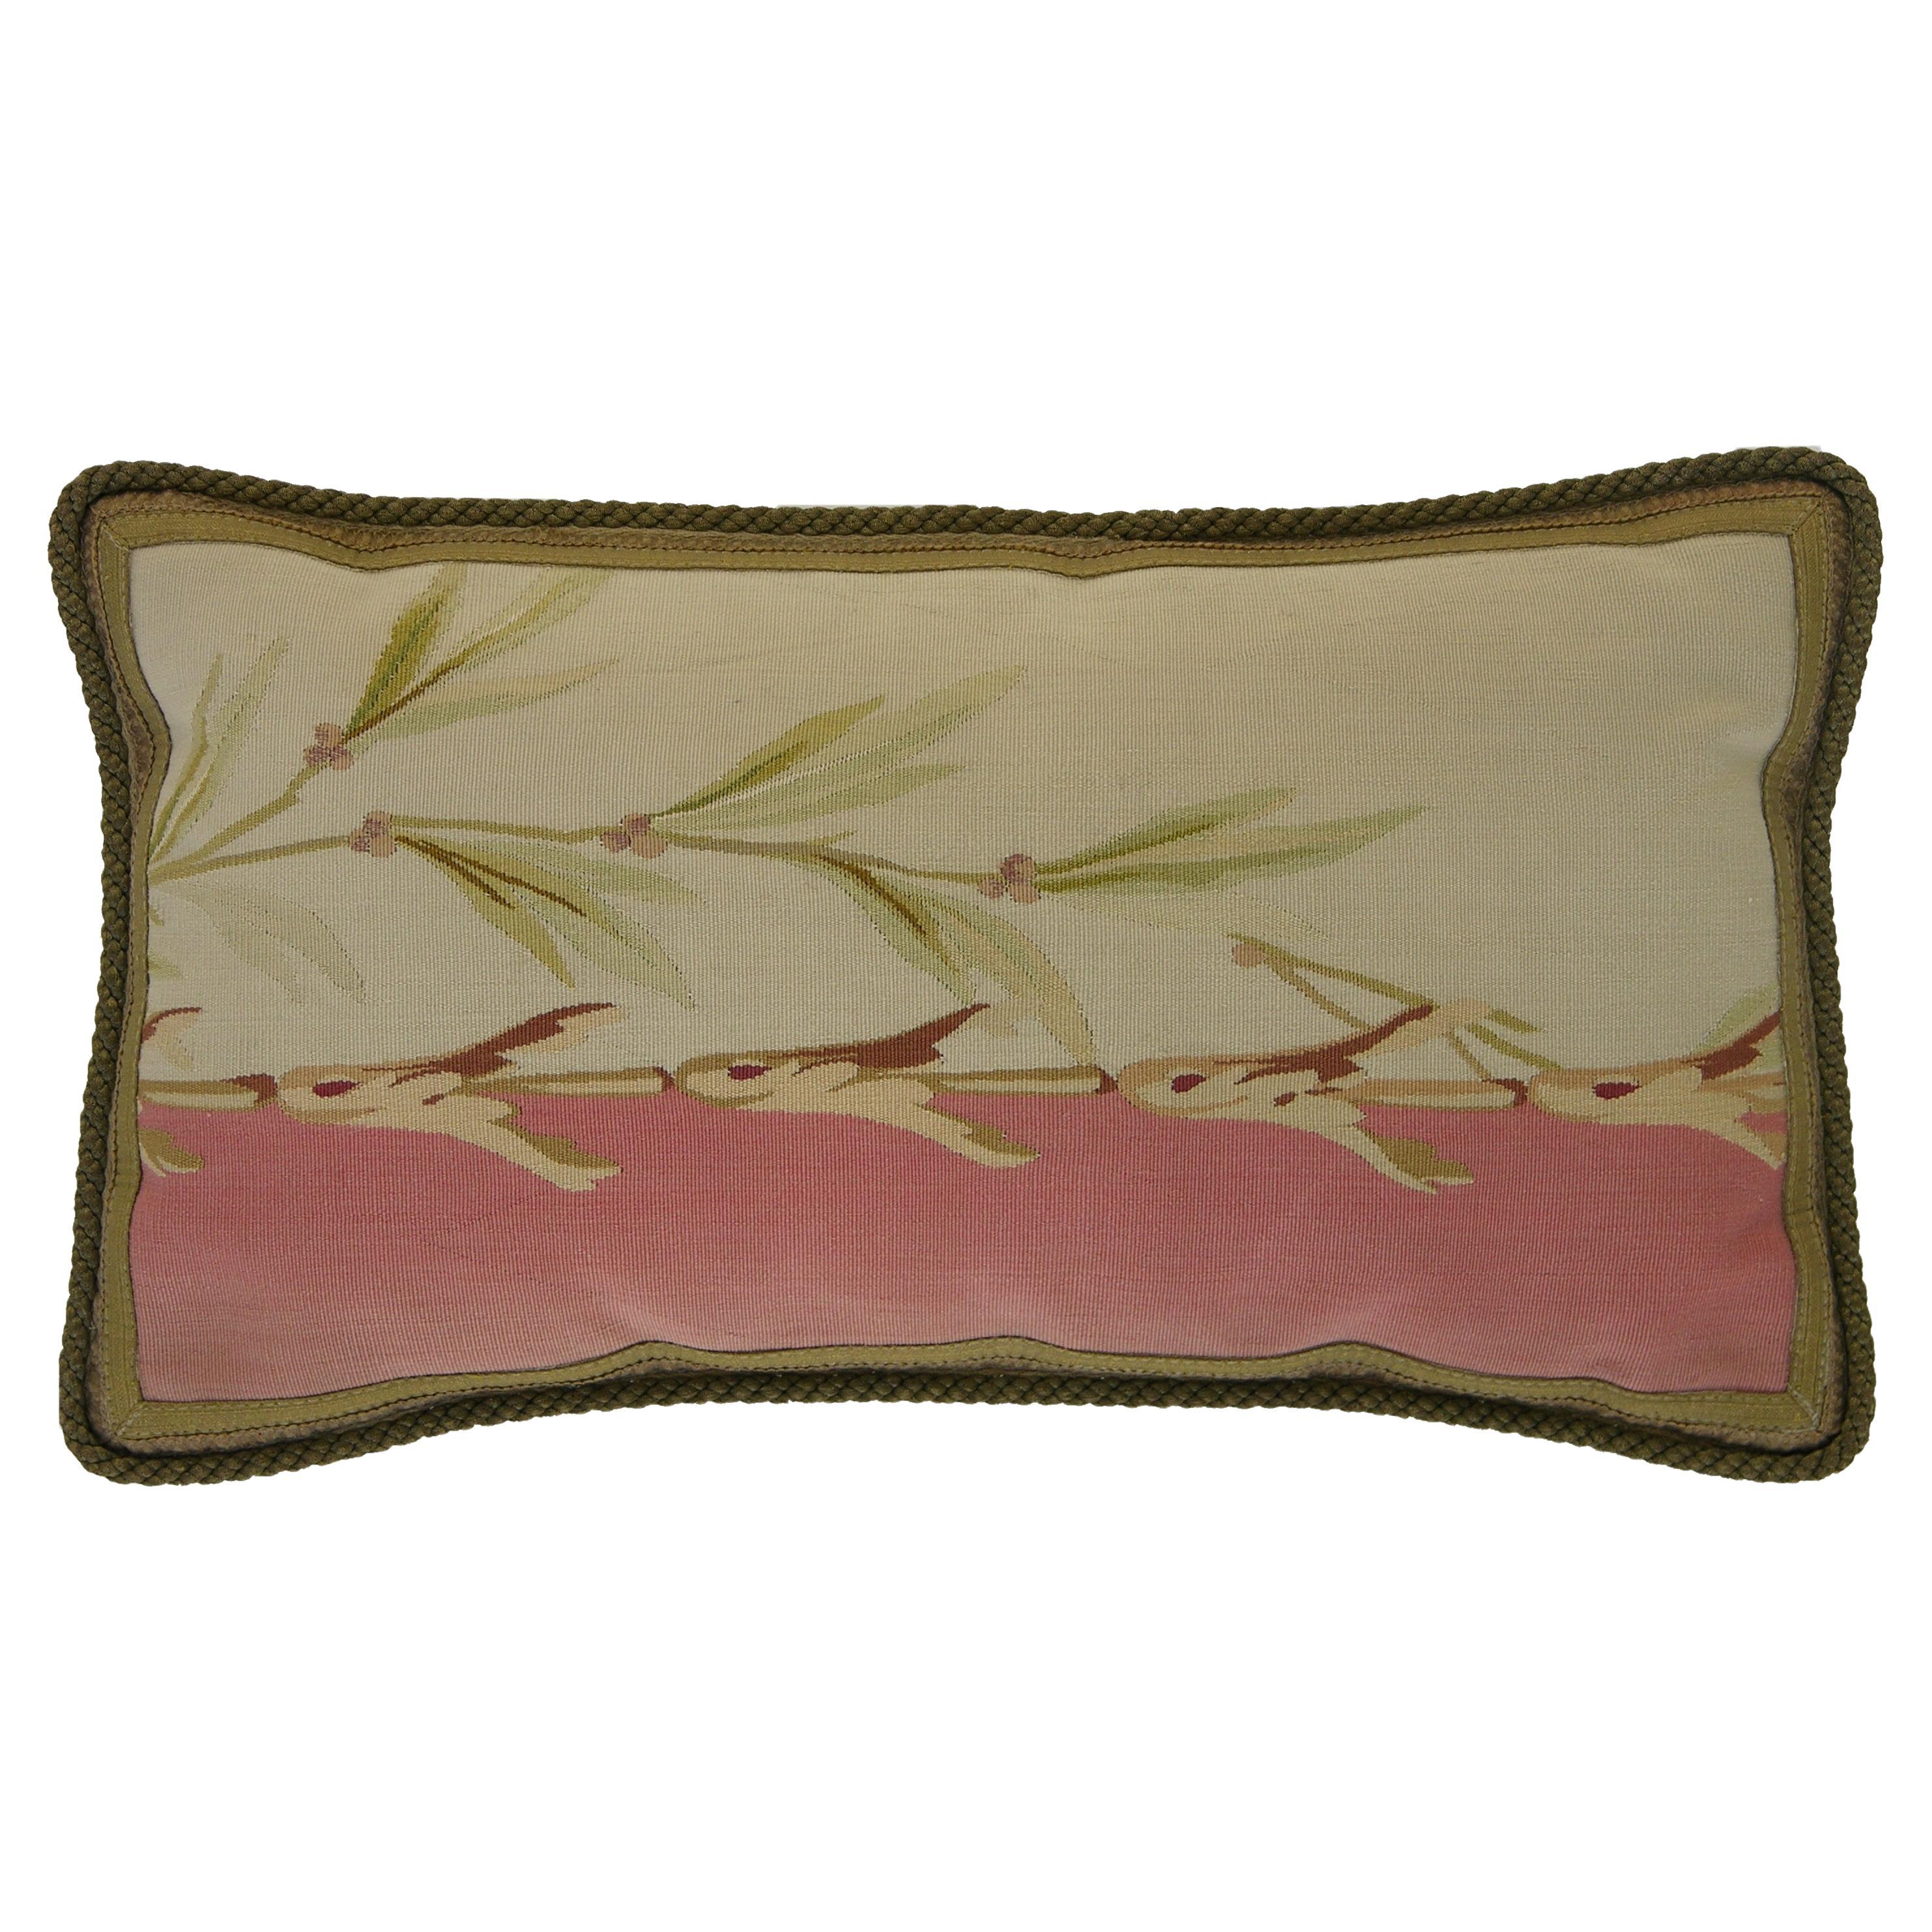 1860s Antique French Aubusson Tapesatry Pillow For Sale